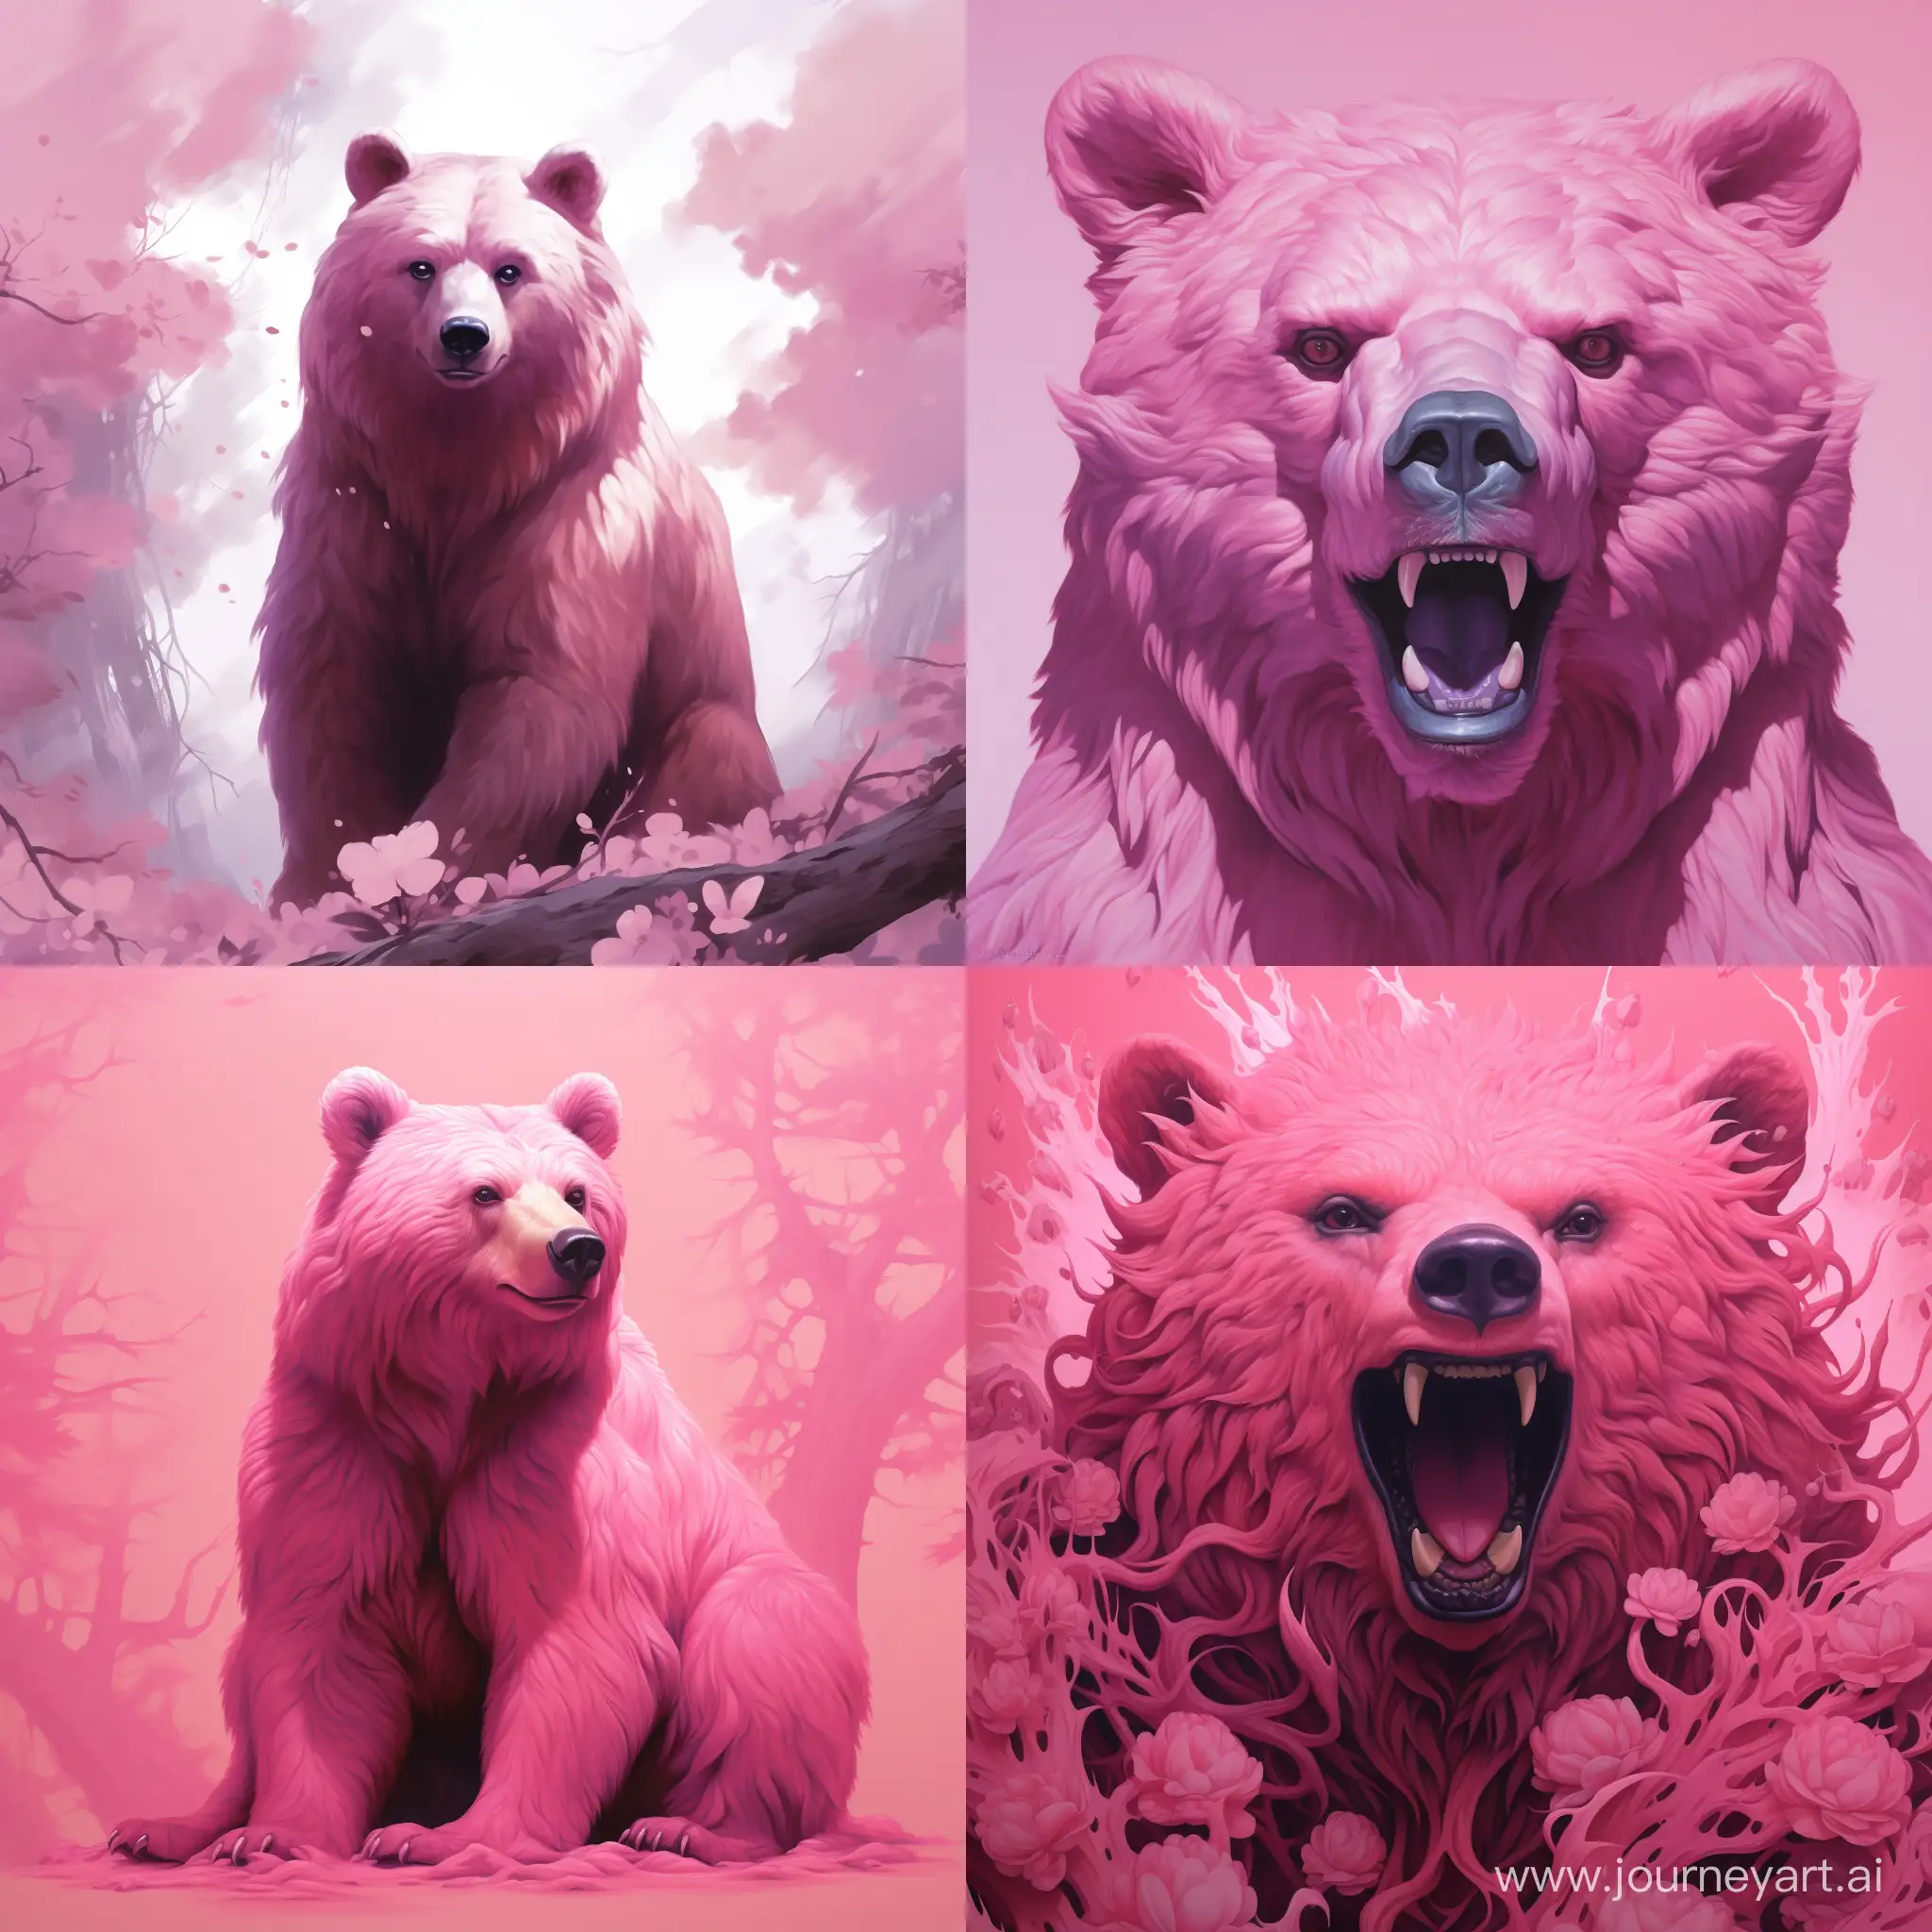 Adorable-Pink-Bear-Staring-in-Serenity